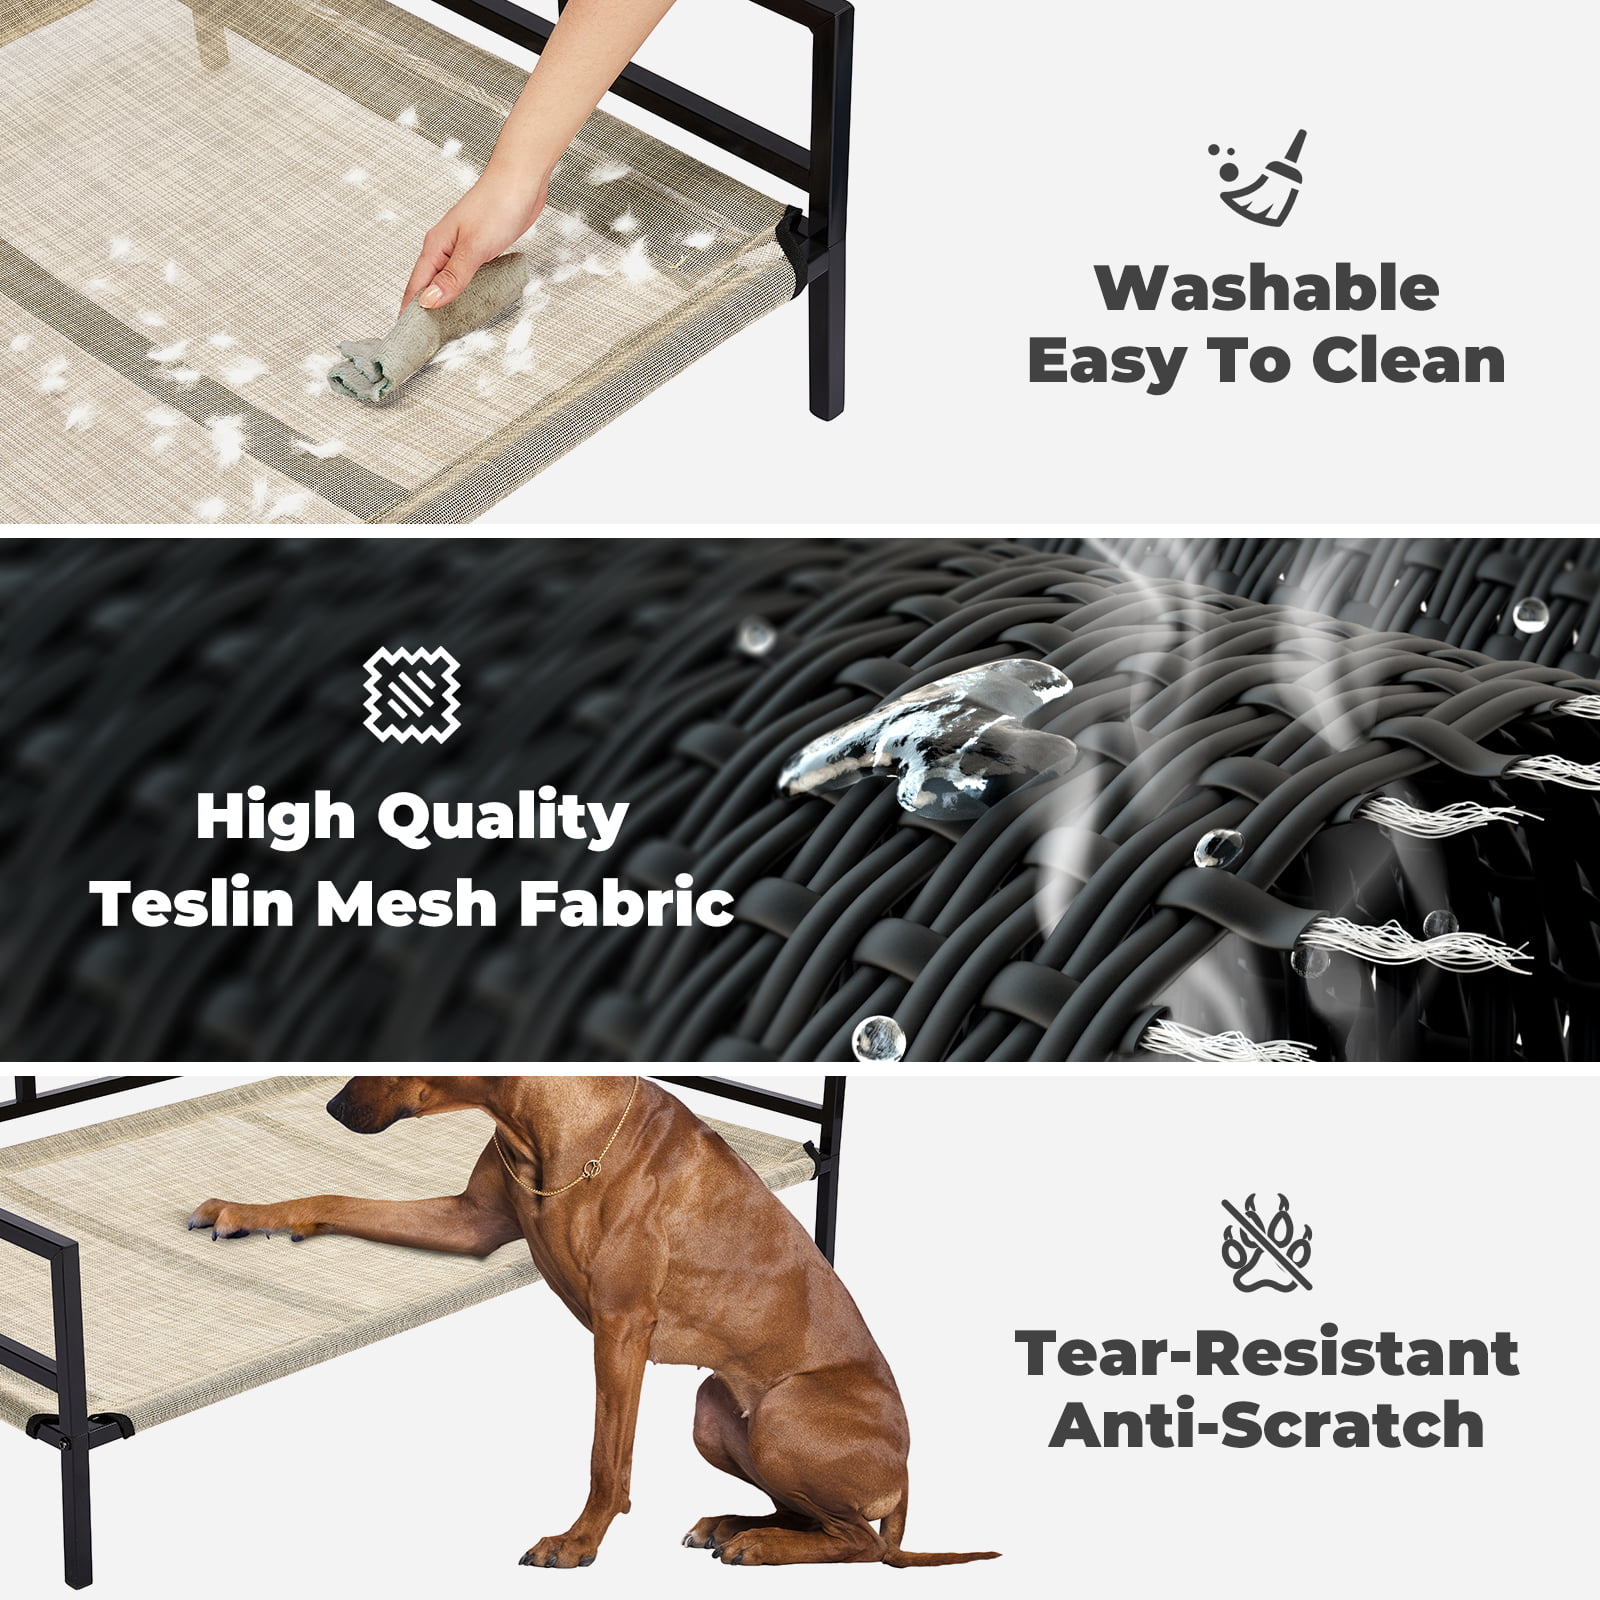 Veehoo Metal Elevated Dog Bed, Cooling Raised Pet Cot with Washable Mesh,  Medium, Black Silver 